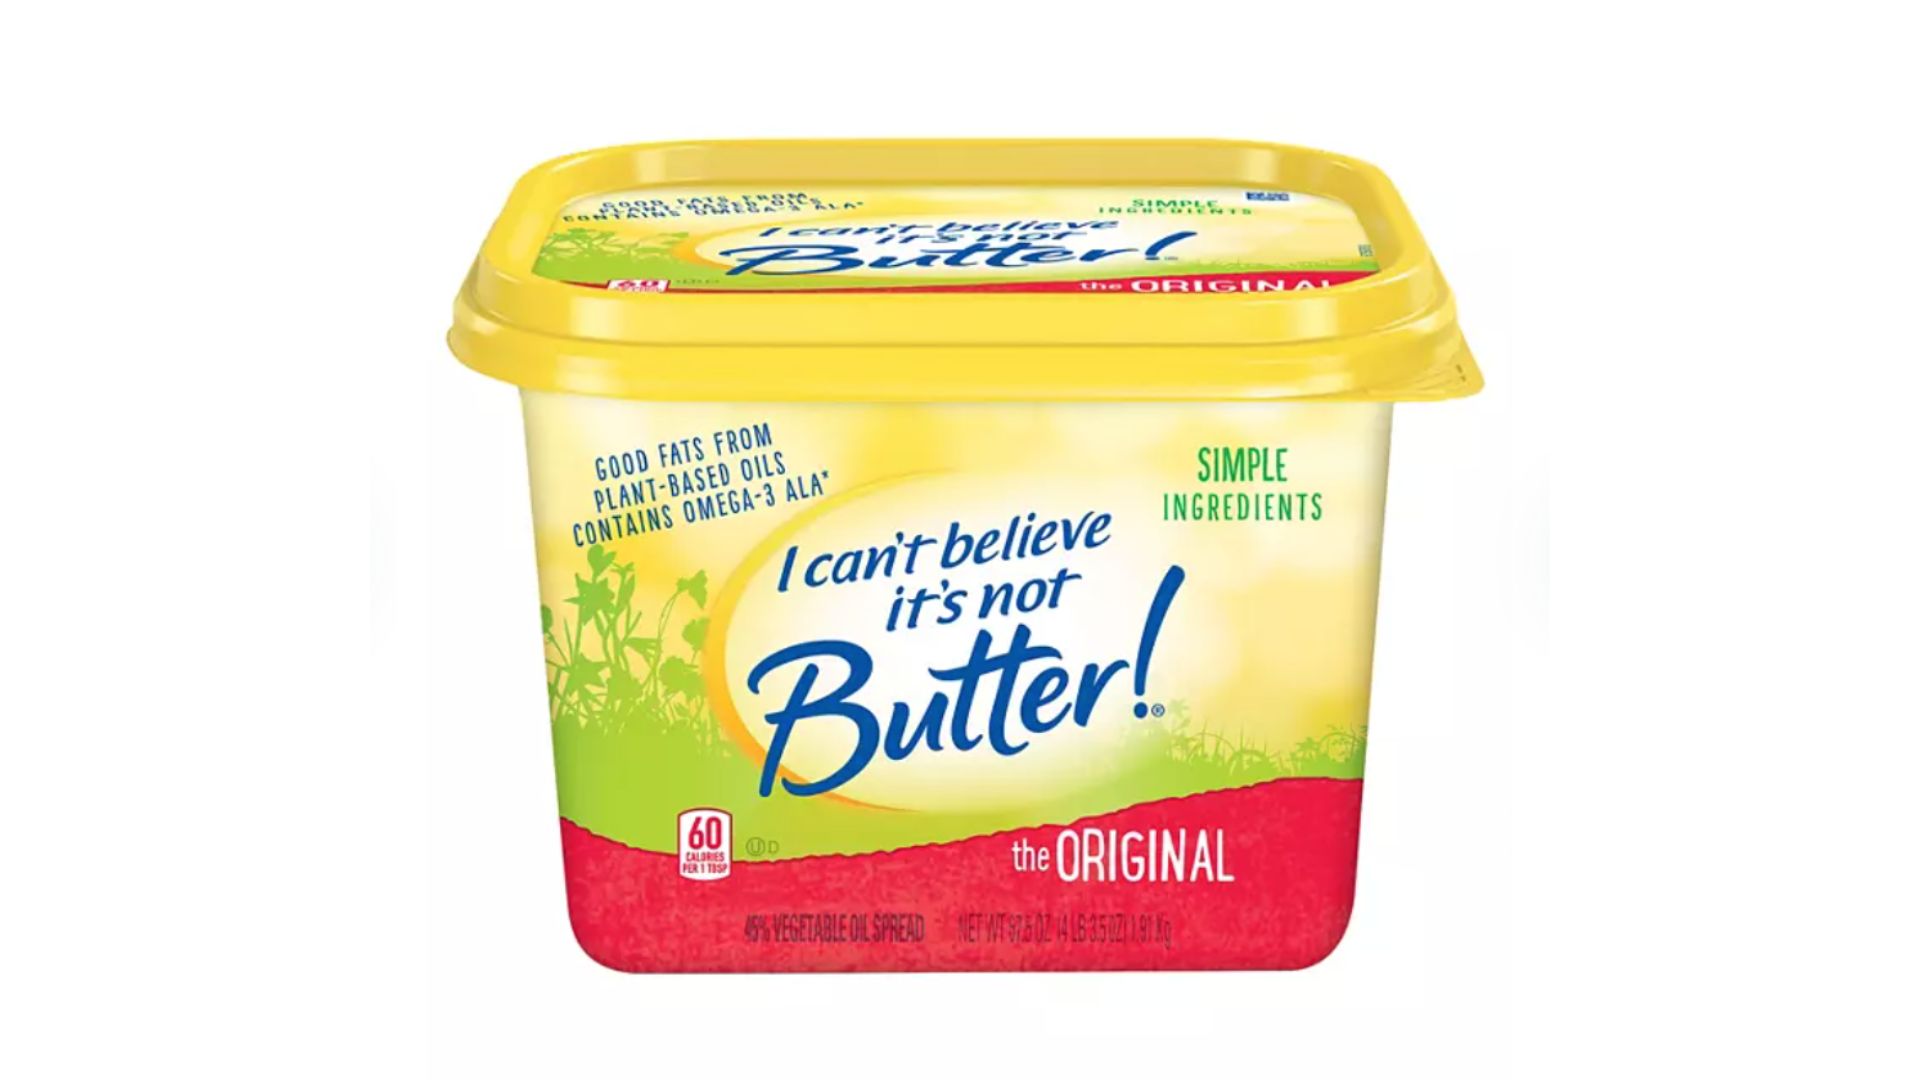 <ul> <li><strong>Price:</strong> <a href="https://www.samsclub.com/p/i-cant-believe-its-not-butter-original/prod23151640" rel="noreferrer noopener">$9.98</a></li> </ul> <p>No pun intended, but we could not believe this product had 510 one-star ratings. </p> <p>Why are there so many complaints for I Can't Believe It's Not Butter!? It seems the majority of the negative reviews were frustrated about the brand's choice to change its recipe.</p> <p>"For the past ten years, I've been a regular consumer of the product. It had great buttermilk flavor and nice consistency for eating and flavoring of cooked foods," wrote reviewer Homecooking923. "Since your new recipe was introduced I found it lacking in all areas. No flavor, too oily and its artificial appearance is unappetizing. We have consumed our last tub of your product and will be switching to a real butter product that comes straight from the cow."</p>  <p><strong>More From GOBankingRates</strong></p>   <ul> <li><a href="https://www.gobankingrates.com/saving-money/shopping/expensive-costco-items-that-are-definitely-worth-the-cost/?utm_term=incontent_link_3&utm_campaign=1266949&utm_source=msn.com&utm_content=9&utm_medium=rss" rel=""><strong>6 Expensive Costco Items That Are Definitely Worth the Cost</strong></a></li> <li><a href="https://www.gobankingrates.com/retirement/planning/i-was-retired-wasted-big-money-go-back-to-work/?utm_term=incontent_link_4&utm_campaign=1266949&utm_source=msn.com&utm_content=10&utm_medium=rss" rel=""><strong>I Was Retired, but Wasted Big Money On These 3 Things and Had To Go Back To Work</strong></a></li> <li><a href="https://www.gobankingrates.com/retirement/planning/5-reasons-you-should-consider-an-annuity-for-your-retirement-savings?utm_term=incontent_link_5&utm_campaign=1266949&utm_source=msn.com&utm_content=11&utm_medium=rss" rel=""><strong>5 Reasons You Should Consider an Annuity For Your Retirement Savings</strong></a></li> <li><strong><a href="https://www.gobankingrates.com/saving-money/car/10-new-cars-to-avoid-buying-in-2024/?utm_term=incontent_link_6&utm_campaign=1266949&utm_source=msn.com&utm_content=12&utm_medium=rss" rel="">10 New Cars to Avoid Buying in 2024</a></strong></li> </ul>